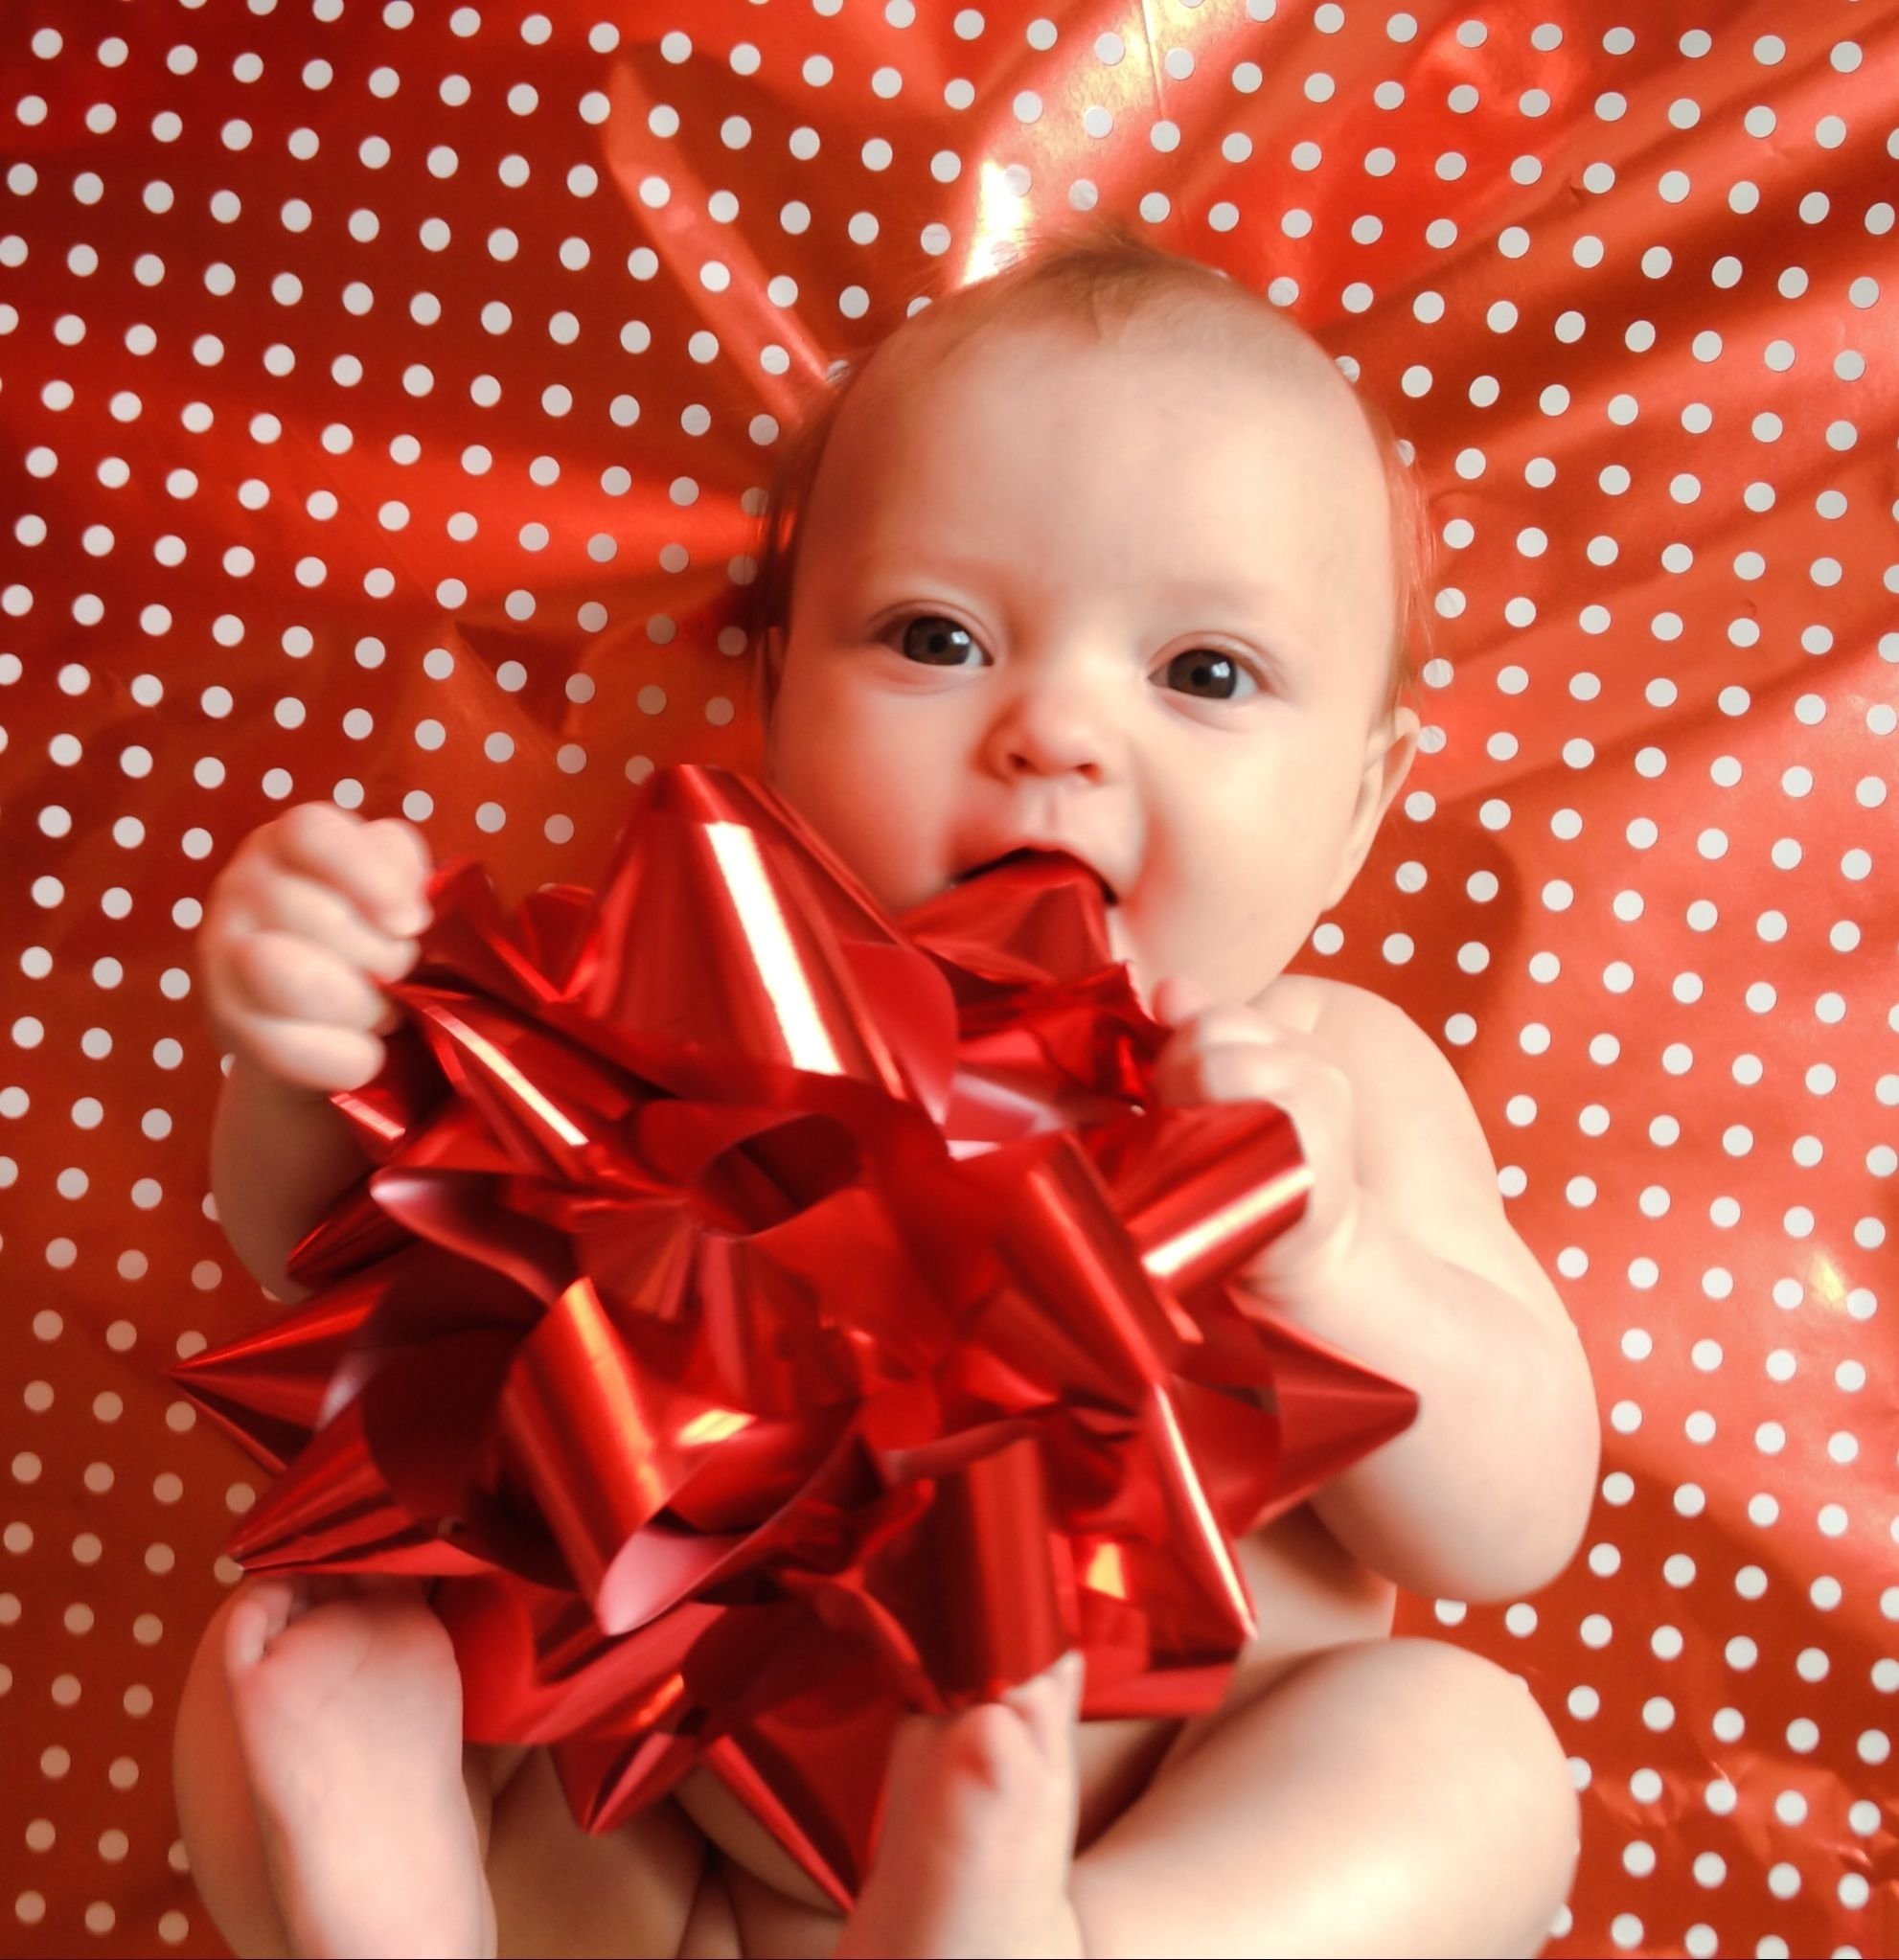 10 Stylish Kids Christmas Photo Shoot Ideas buck naked under the bow imagine my winkie being dragged over your 2022